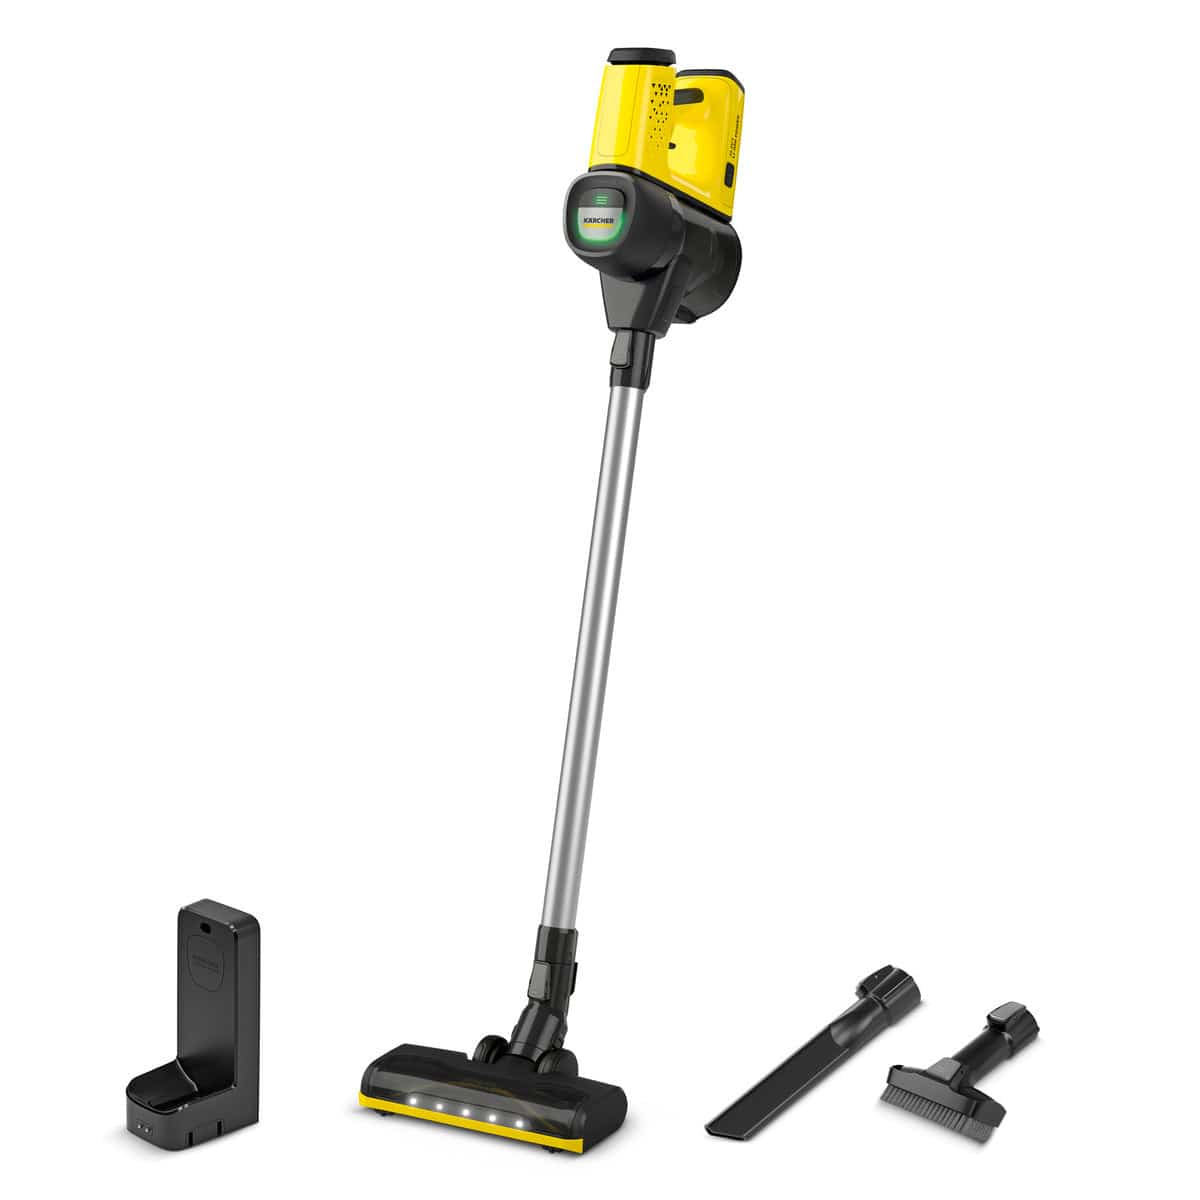 Karcher Cordless Battery Powered Vacuum Cleaner Premium OurFamily- VC 6 | Supply Master | Accra, Ghana Steam & Vacuum Cleaner Buy Tools hardware Building materials